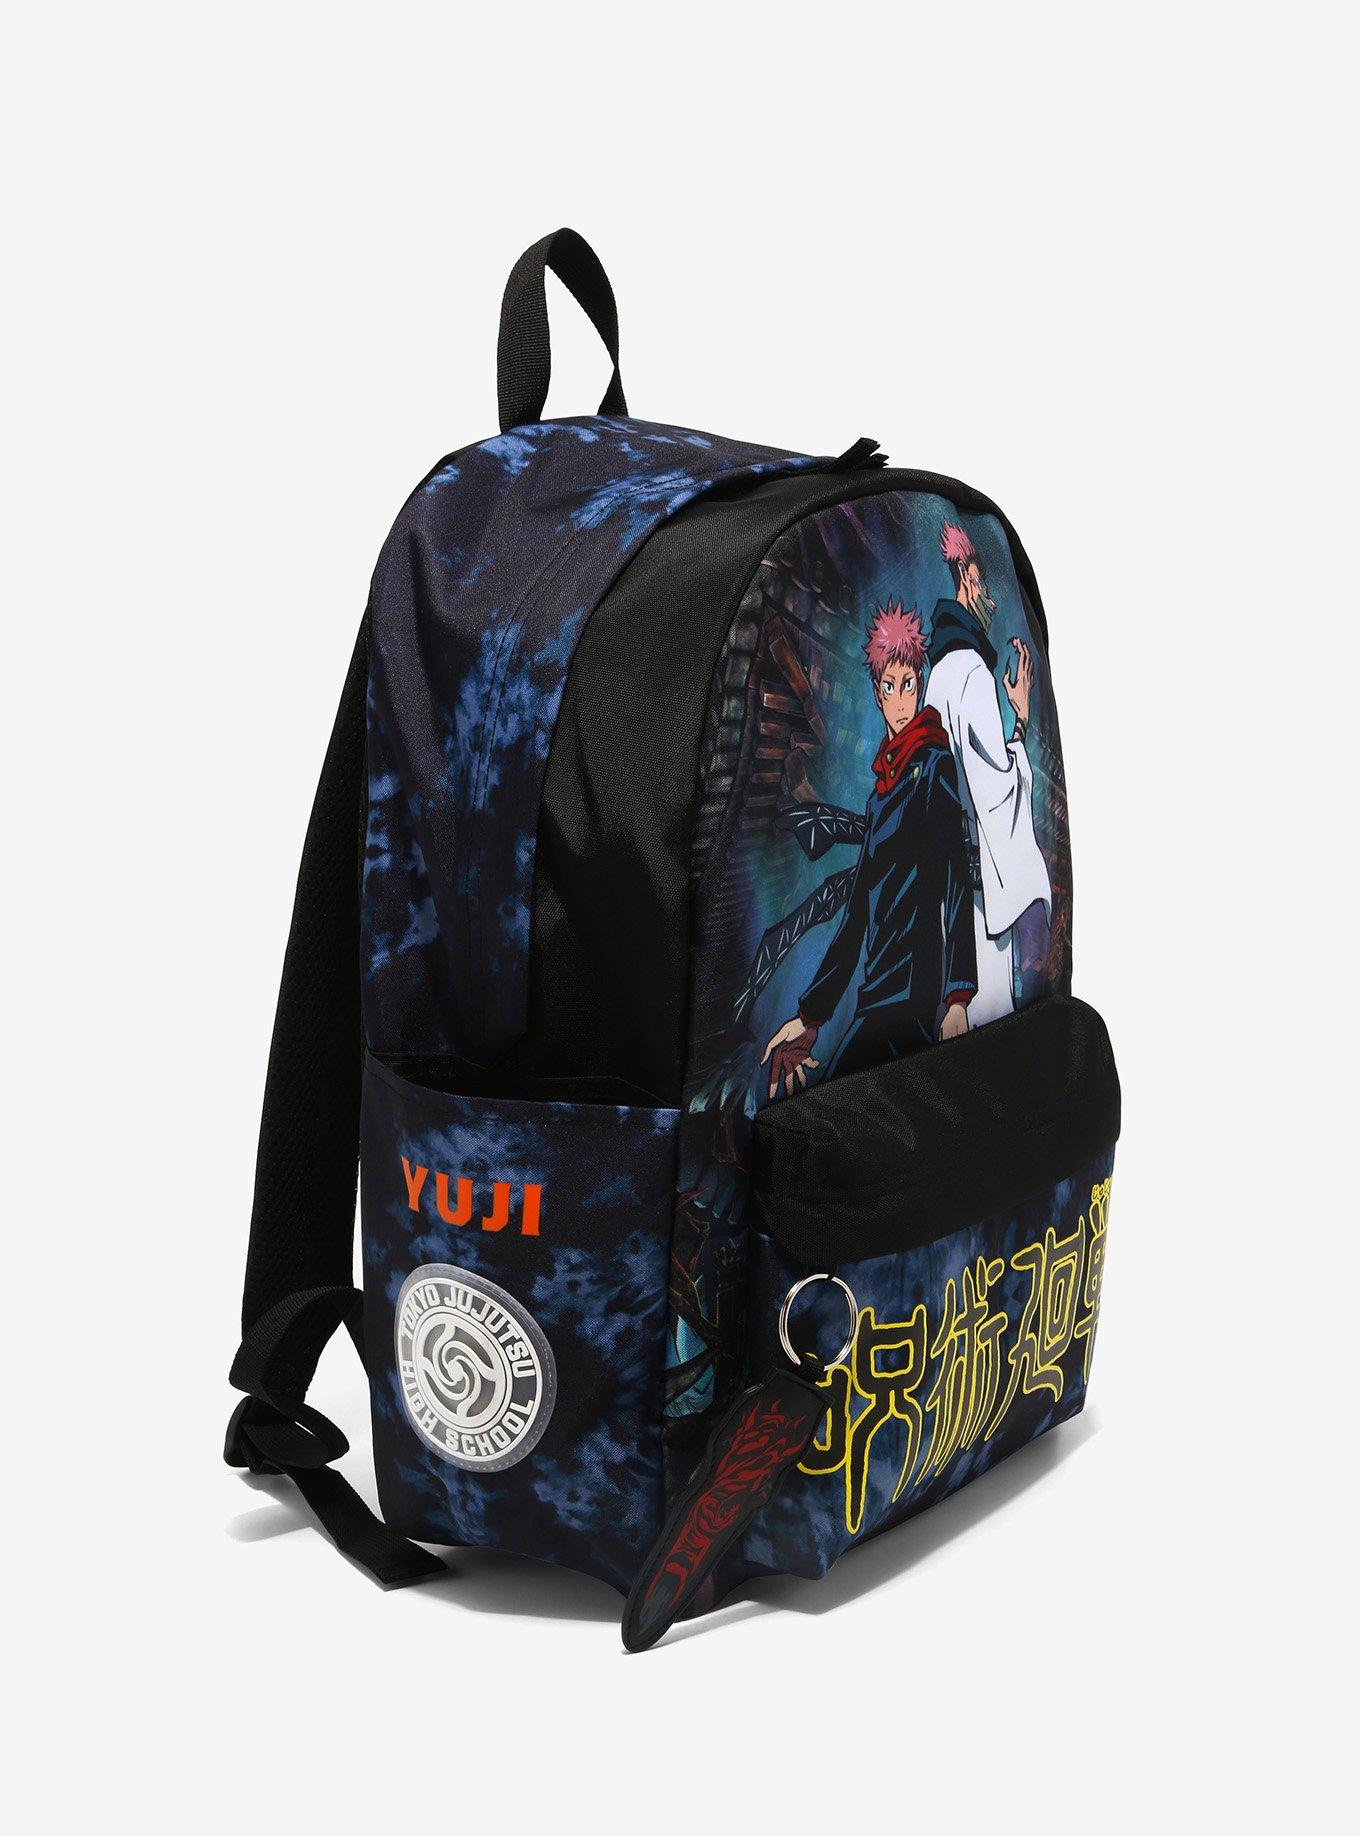 Back to School Supplies, Backpacks & Clothes | Hot Topic